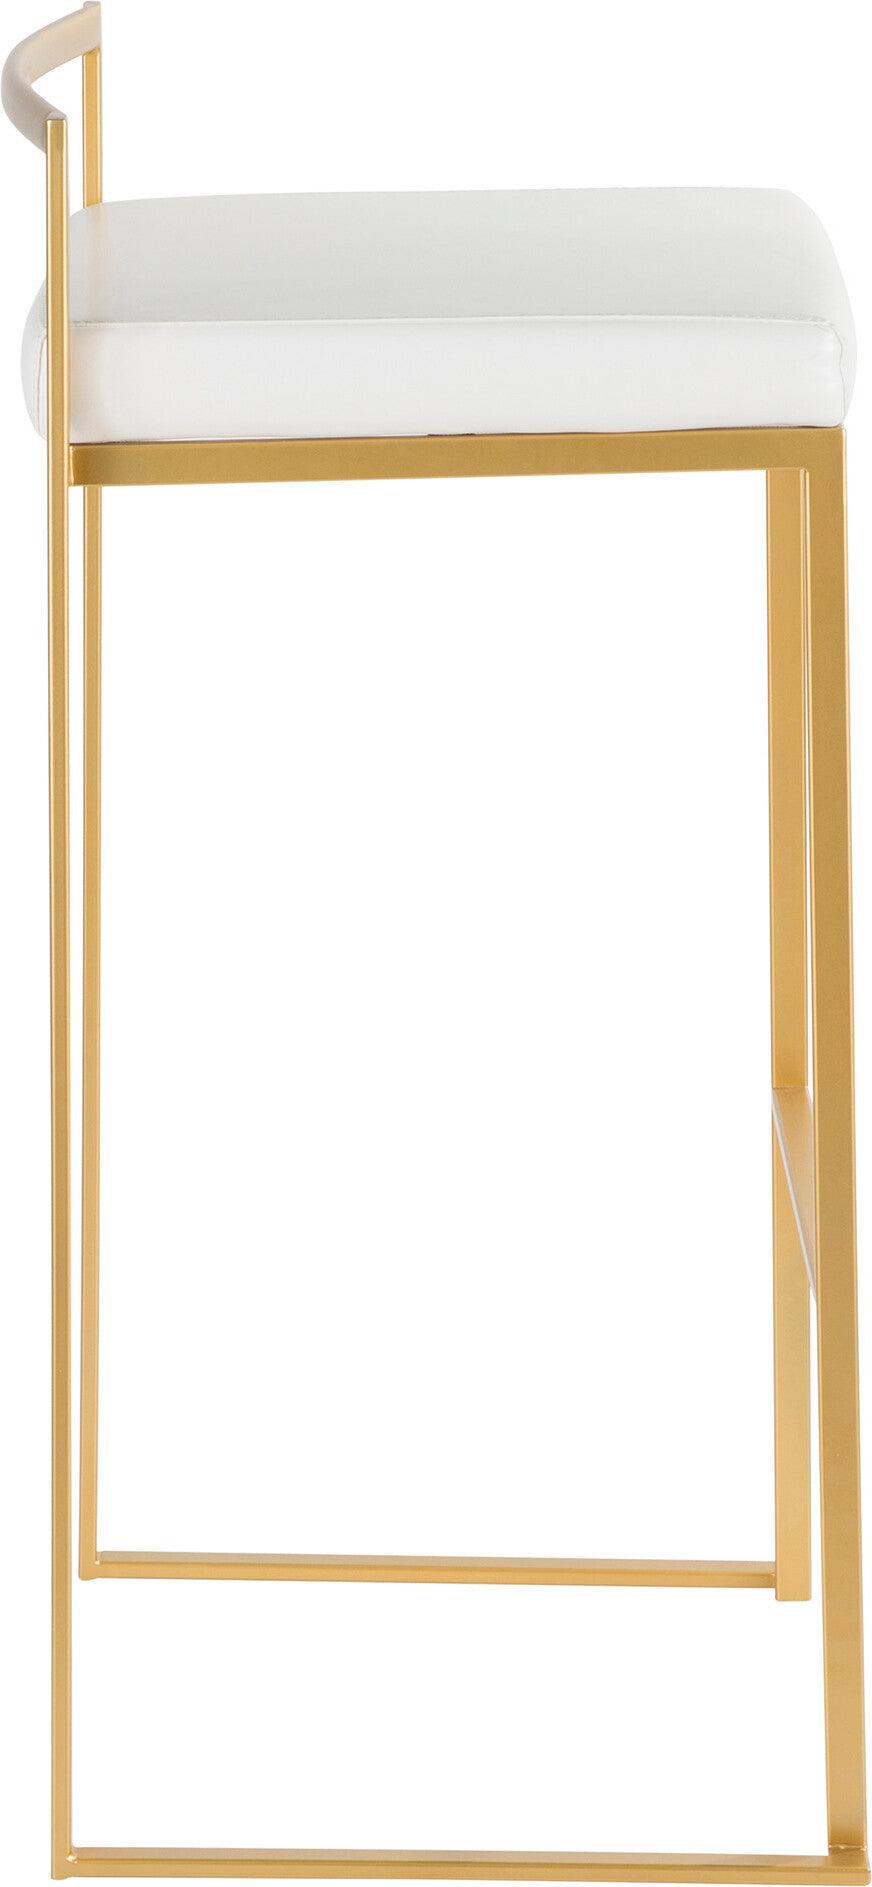 Lumisource Barstools - Fuji Contemporary-Glam Barstool in Gold with White Faux Leather (Set of 2)